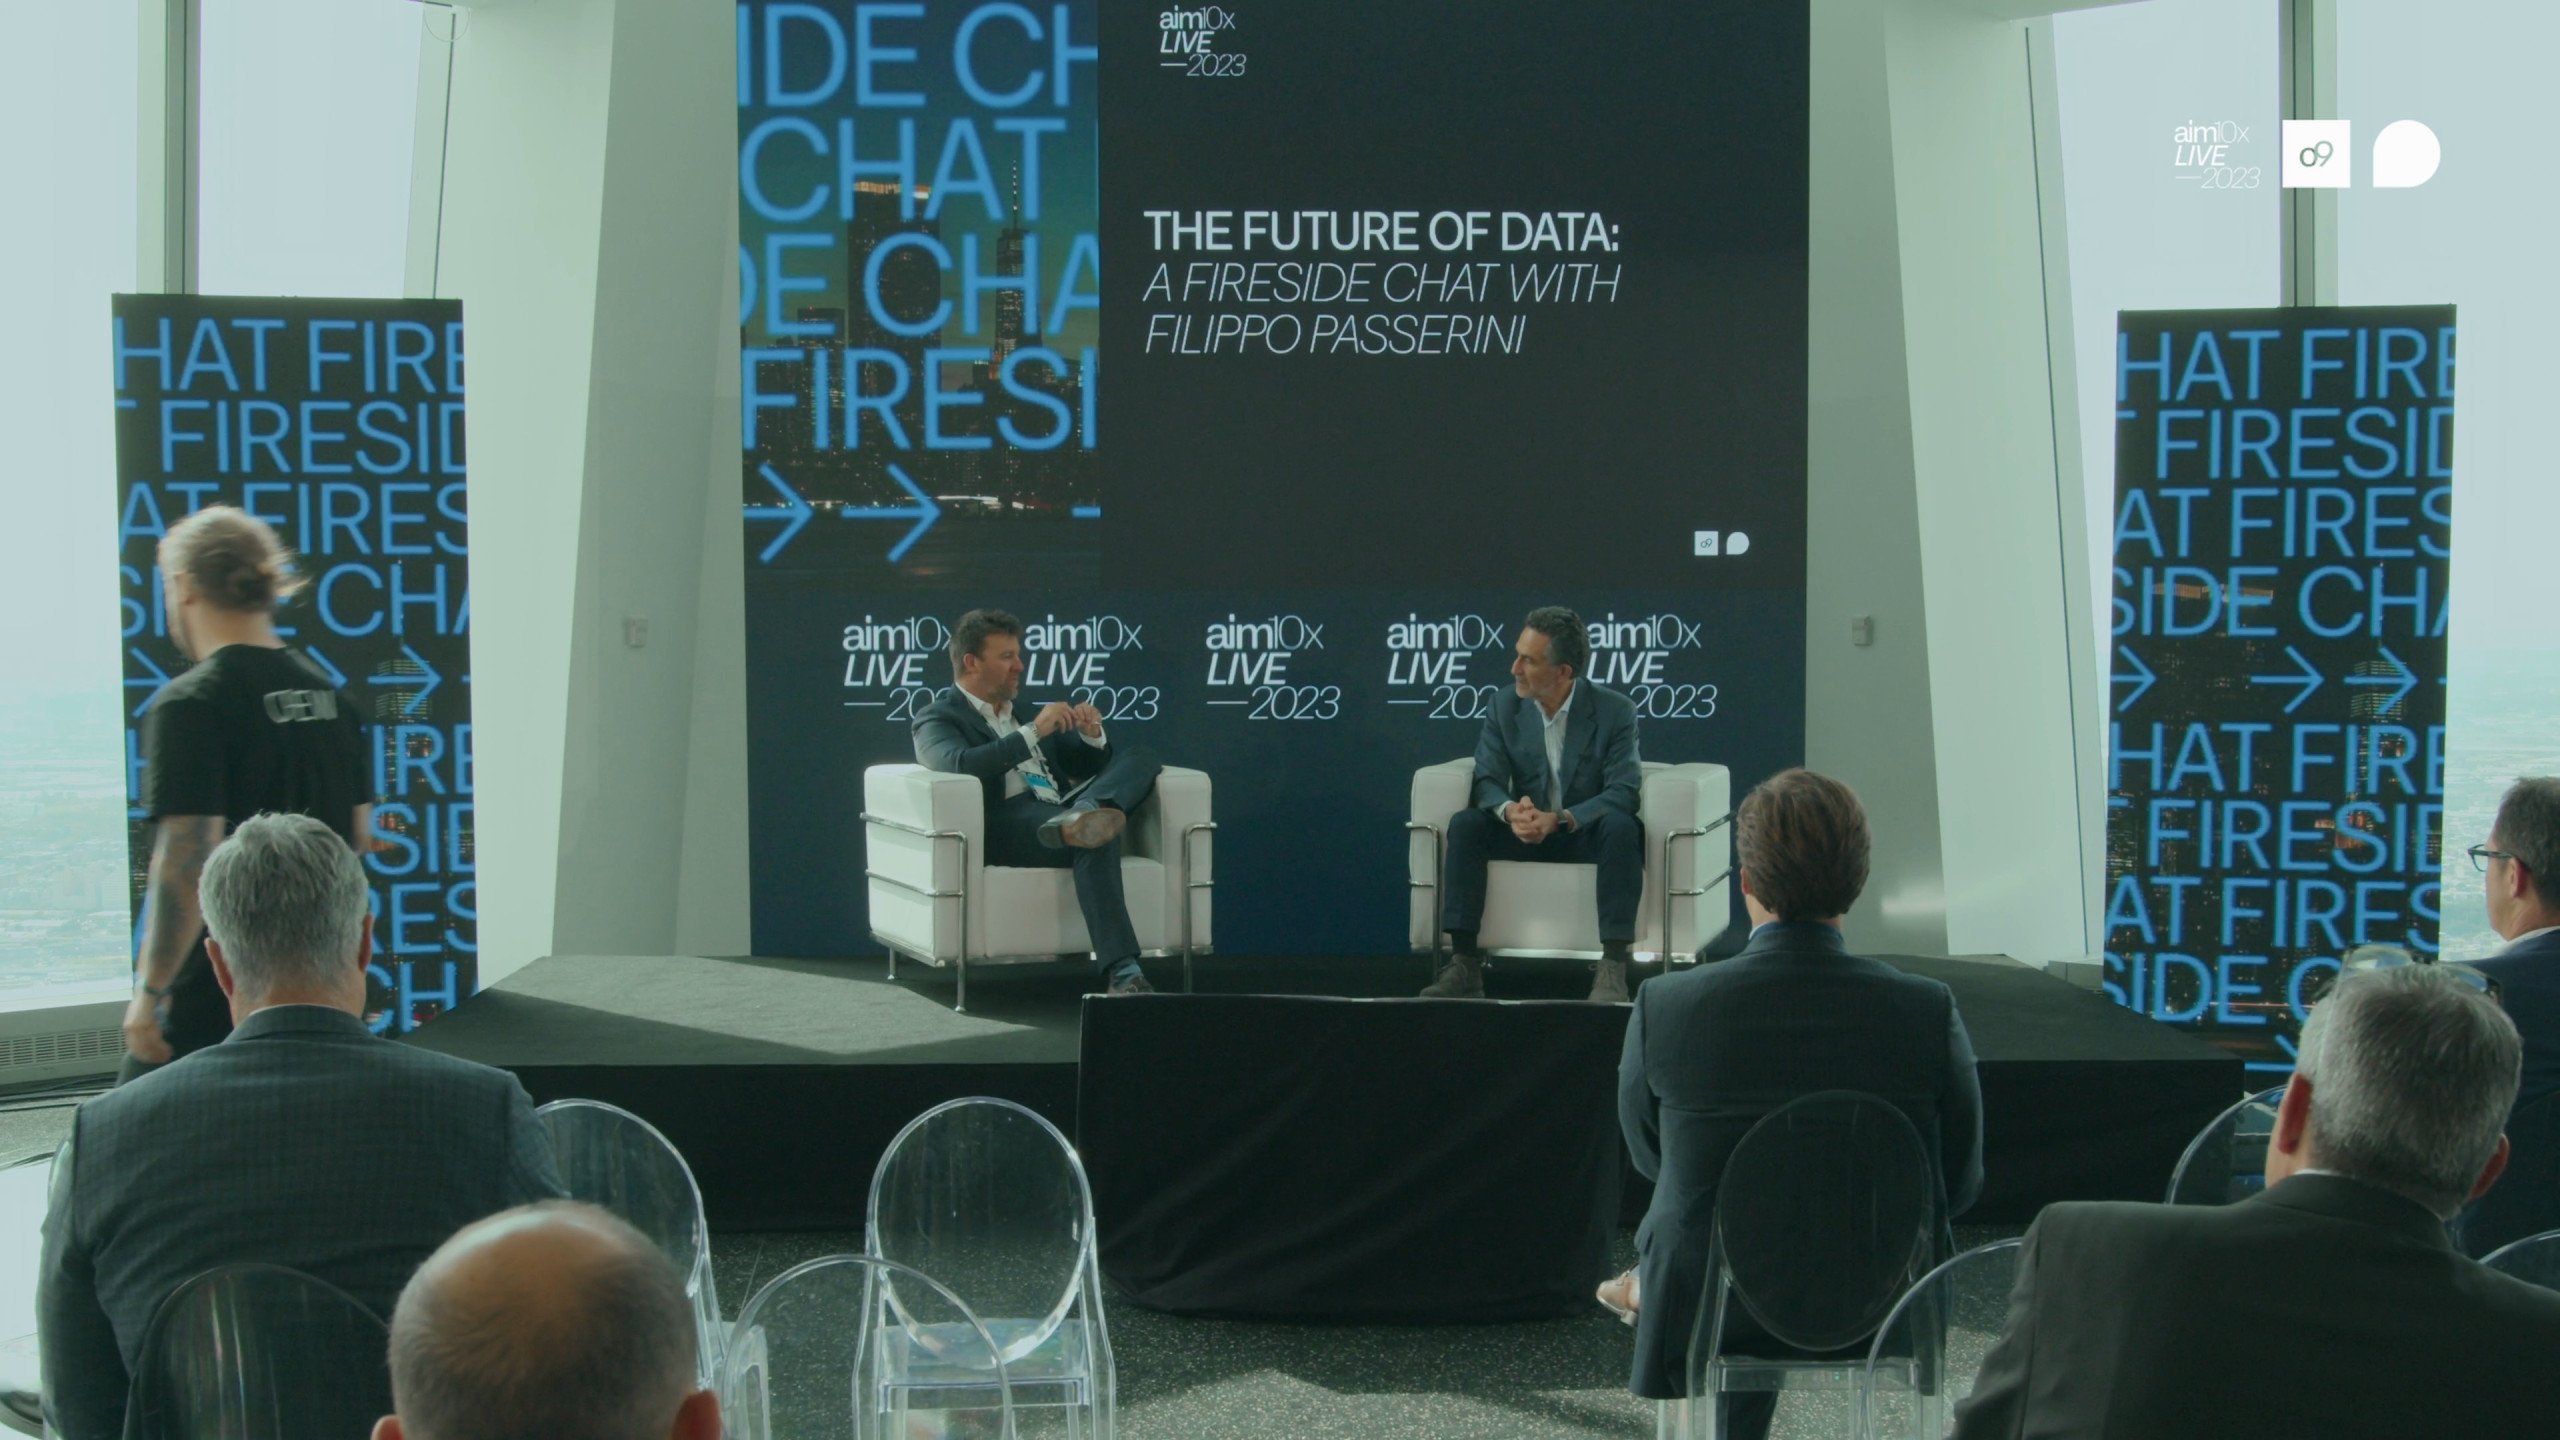 The future of data: a fireside chat with filippo passerini thumbnail